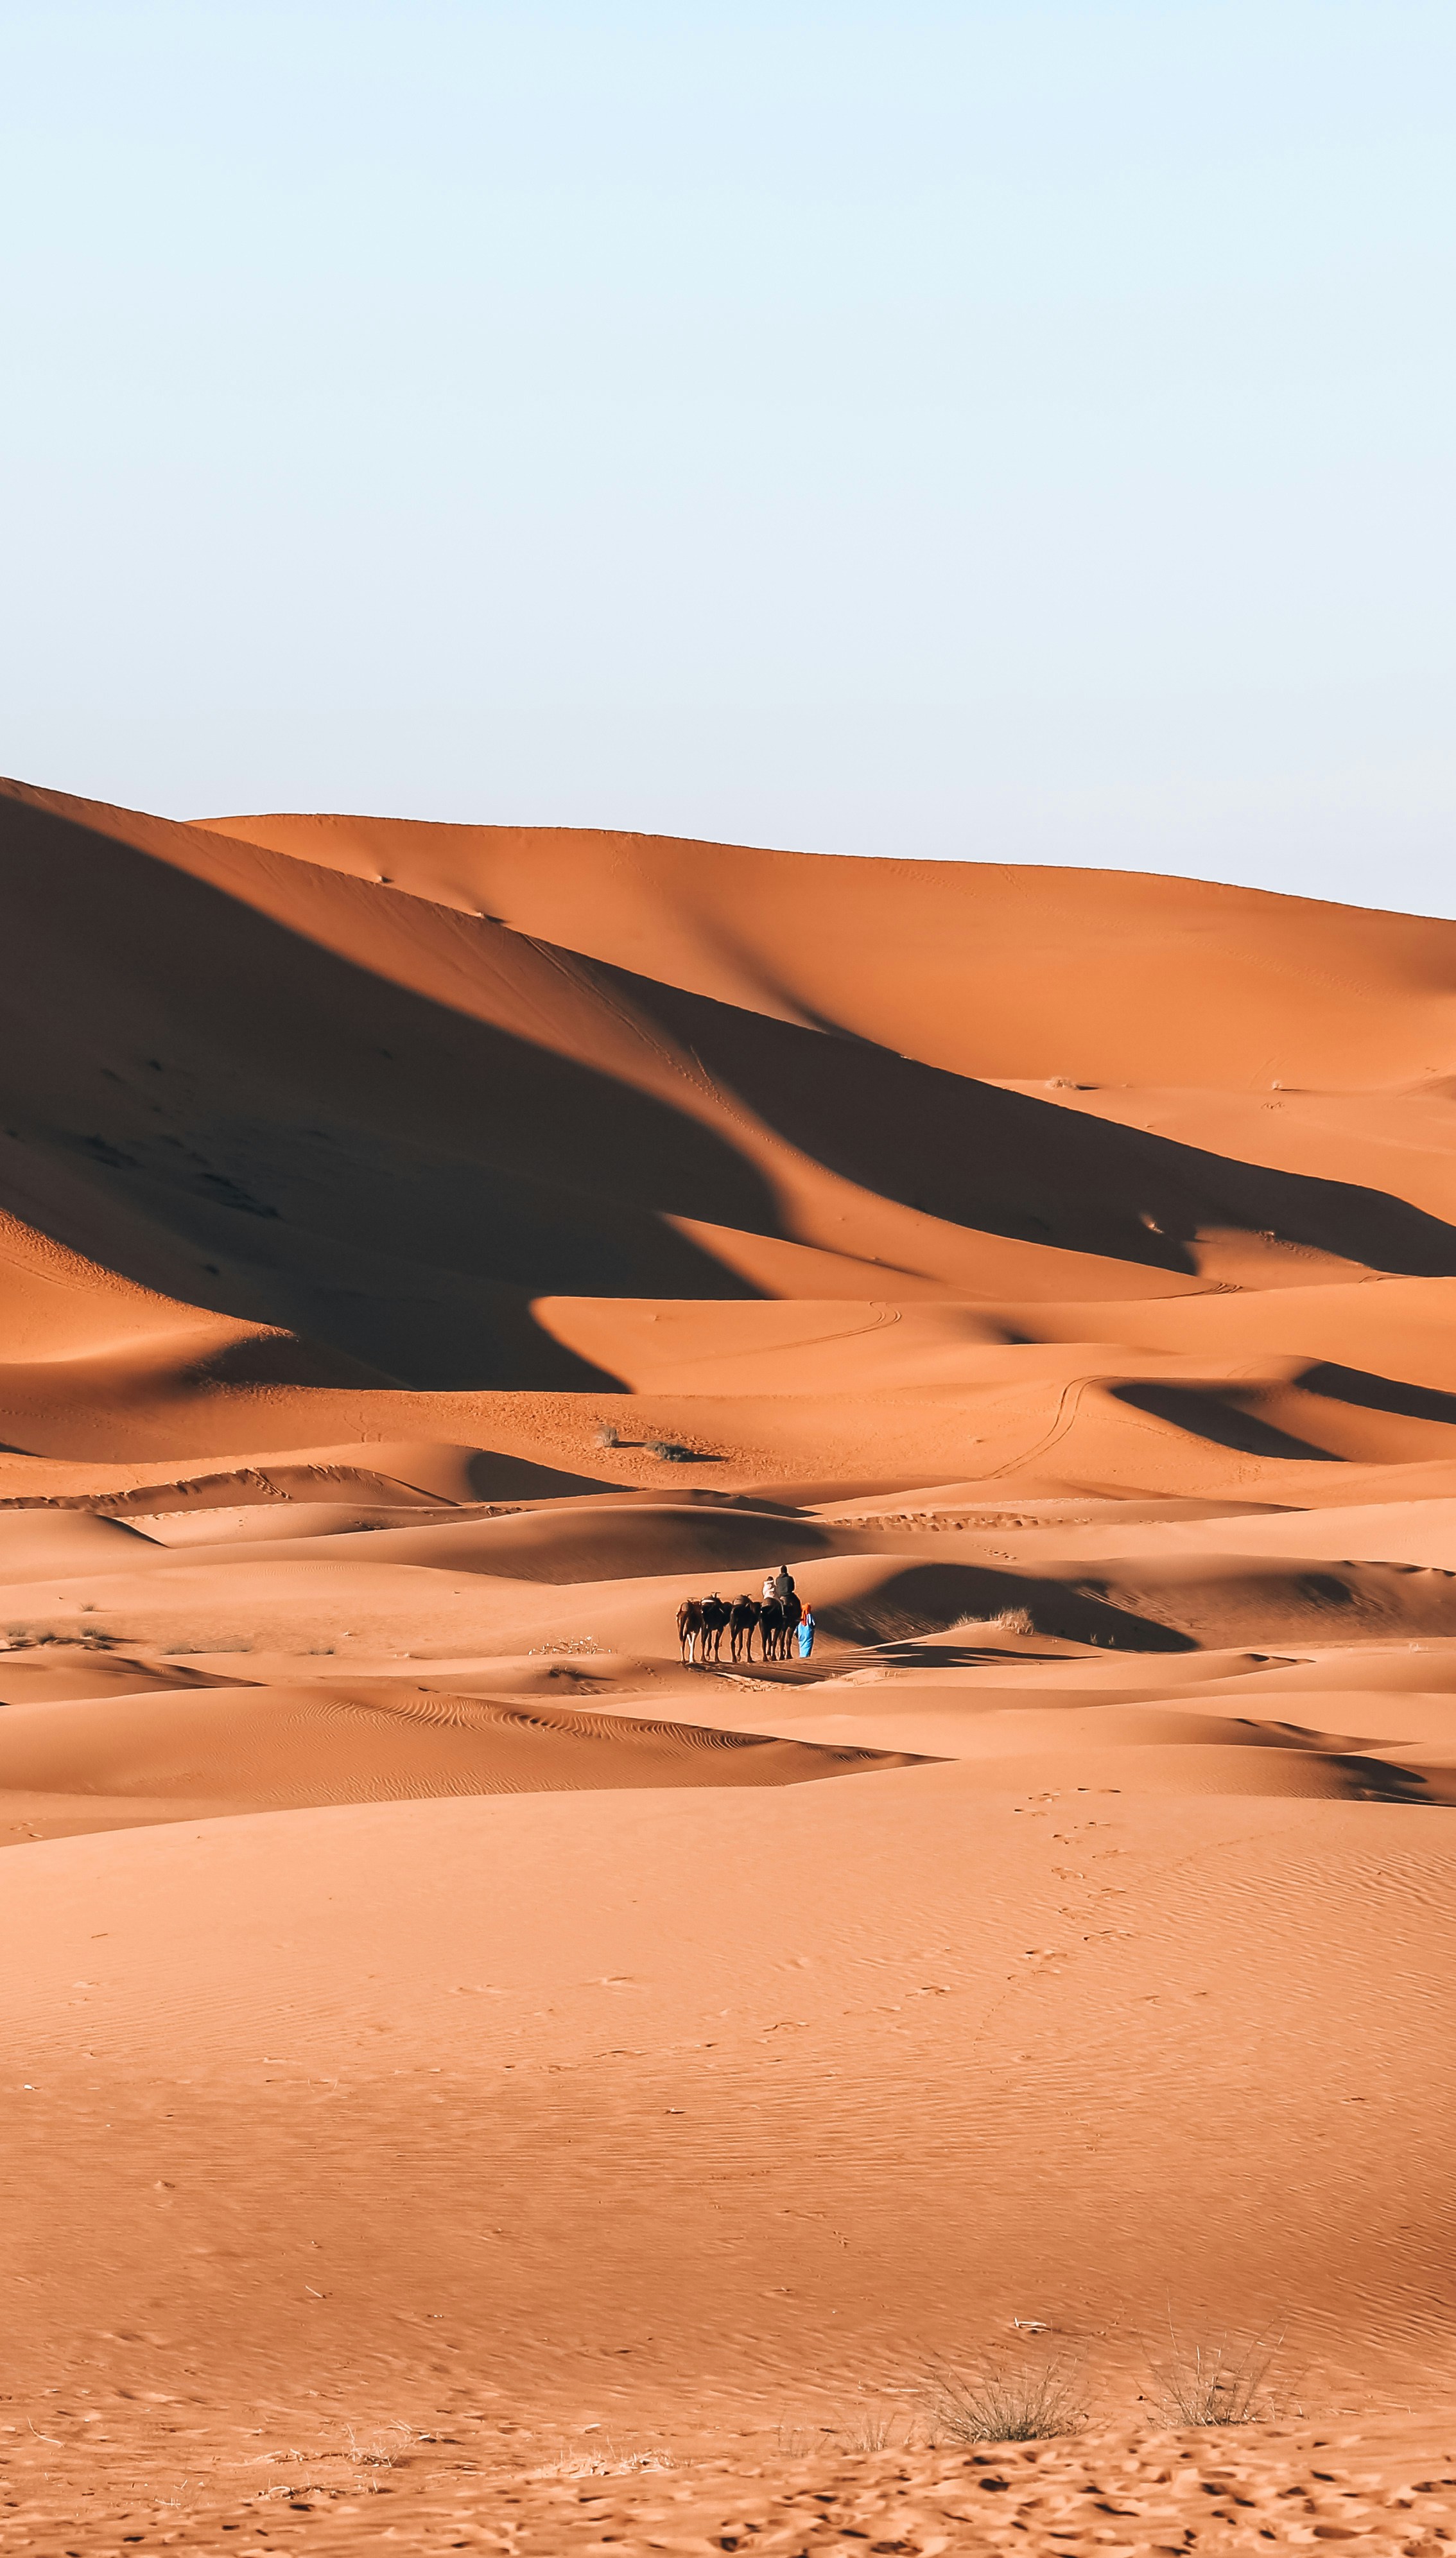 Experience the south & Red dunes from Marrakech